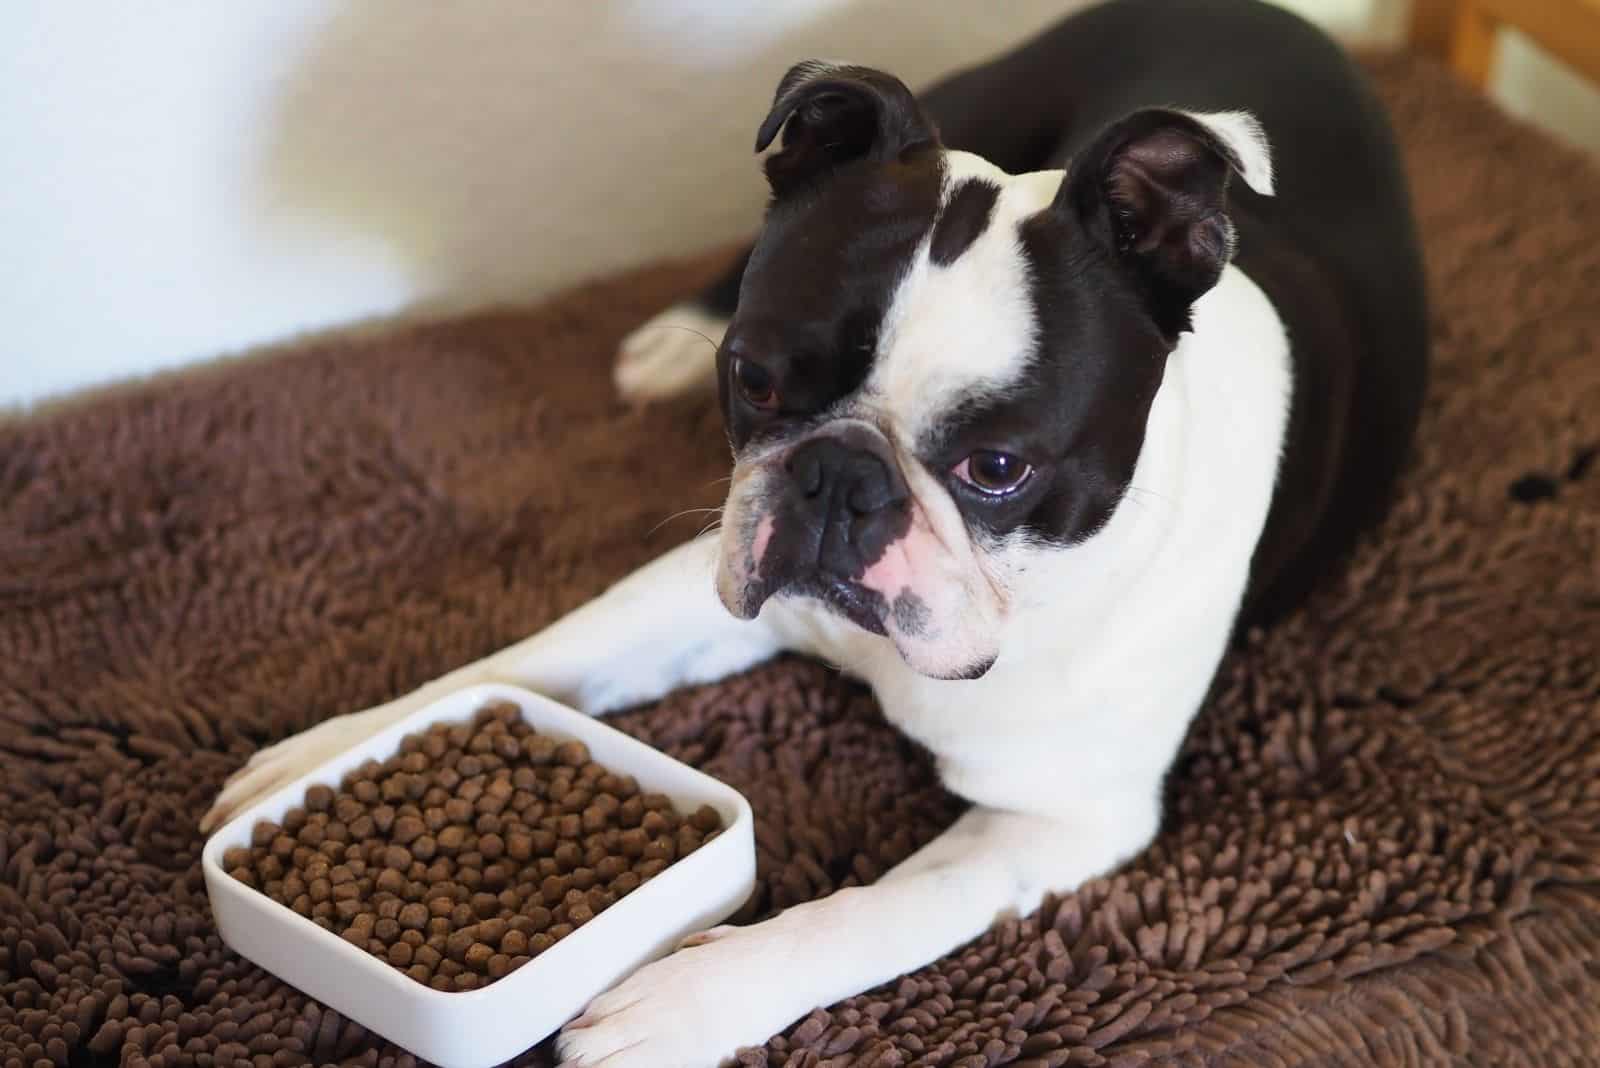 image of an adorable boston terrier lying infront of the dog food